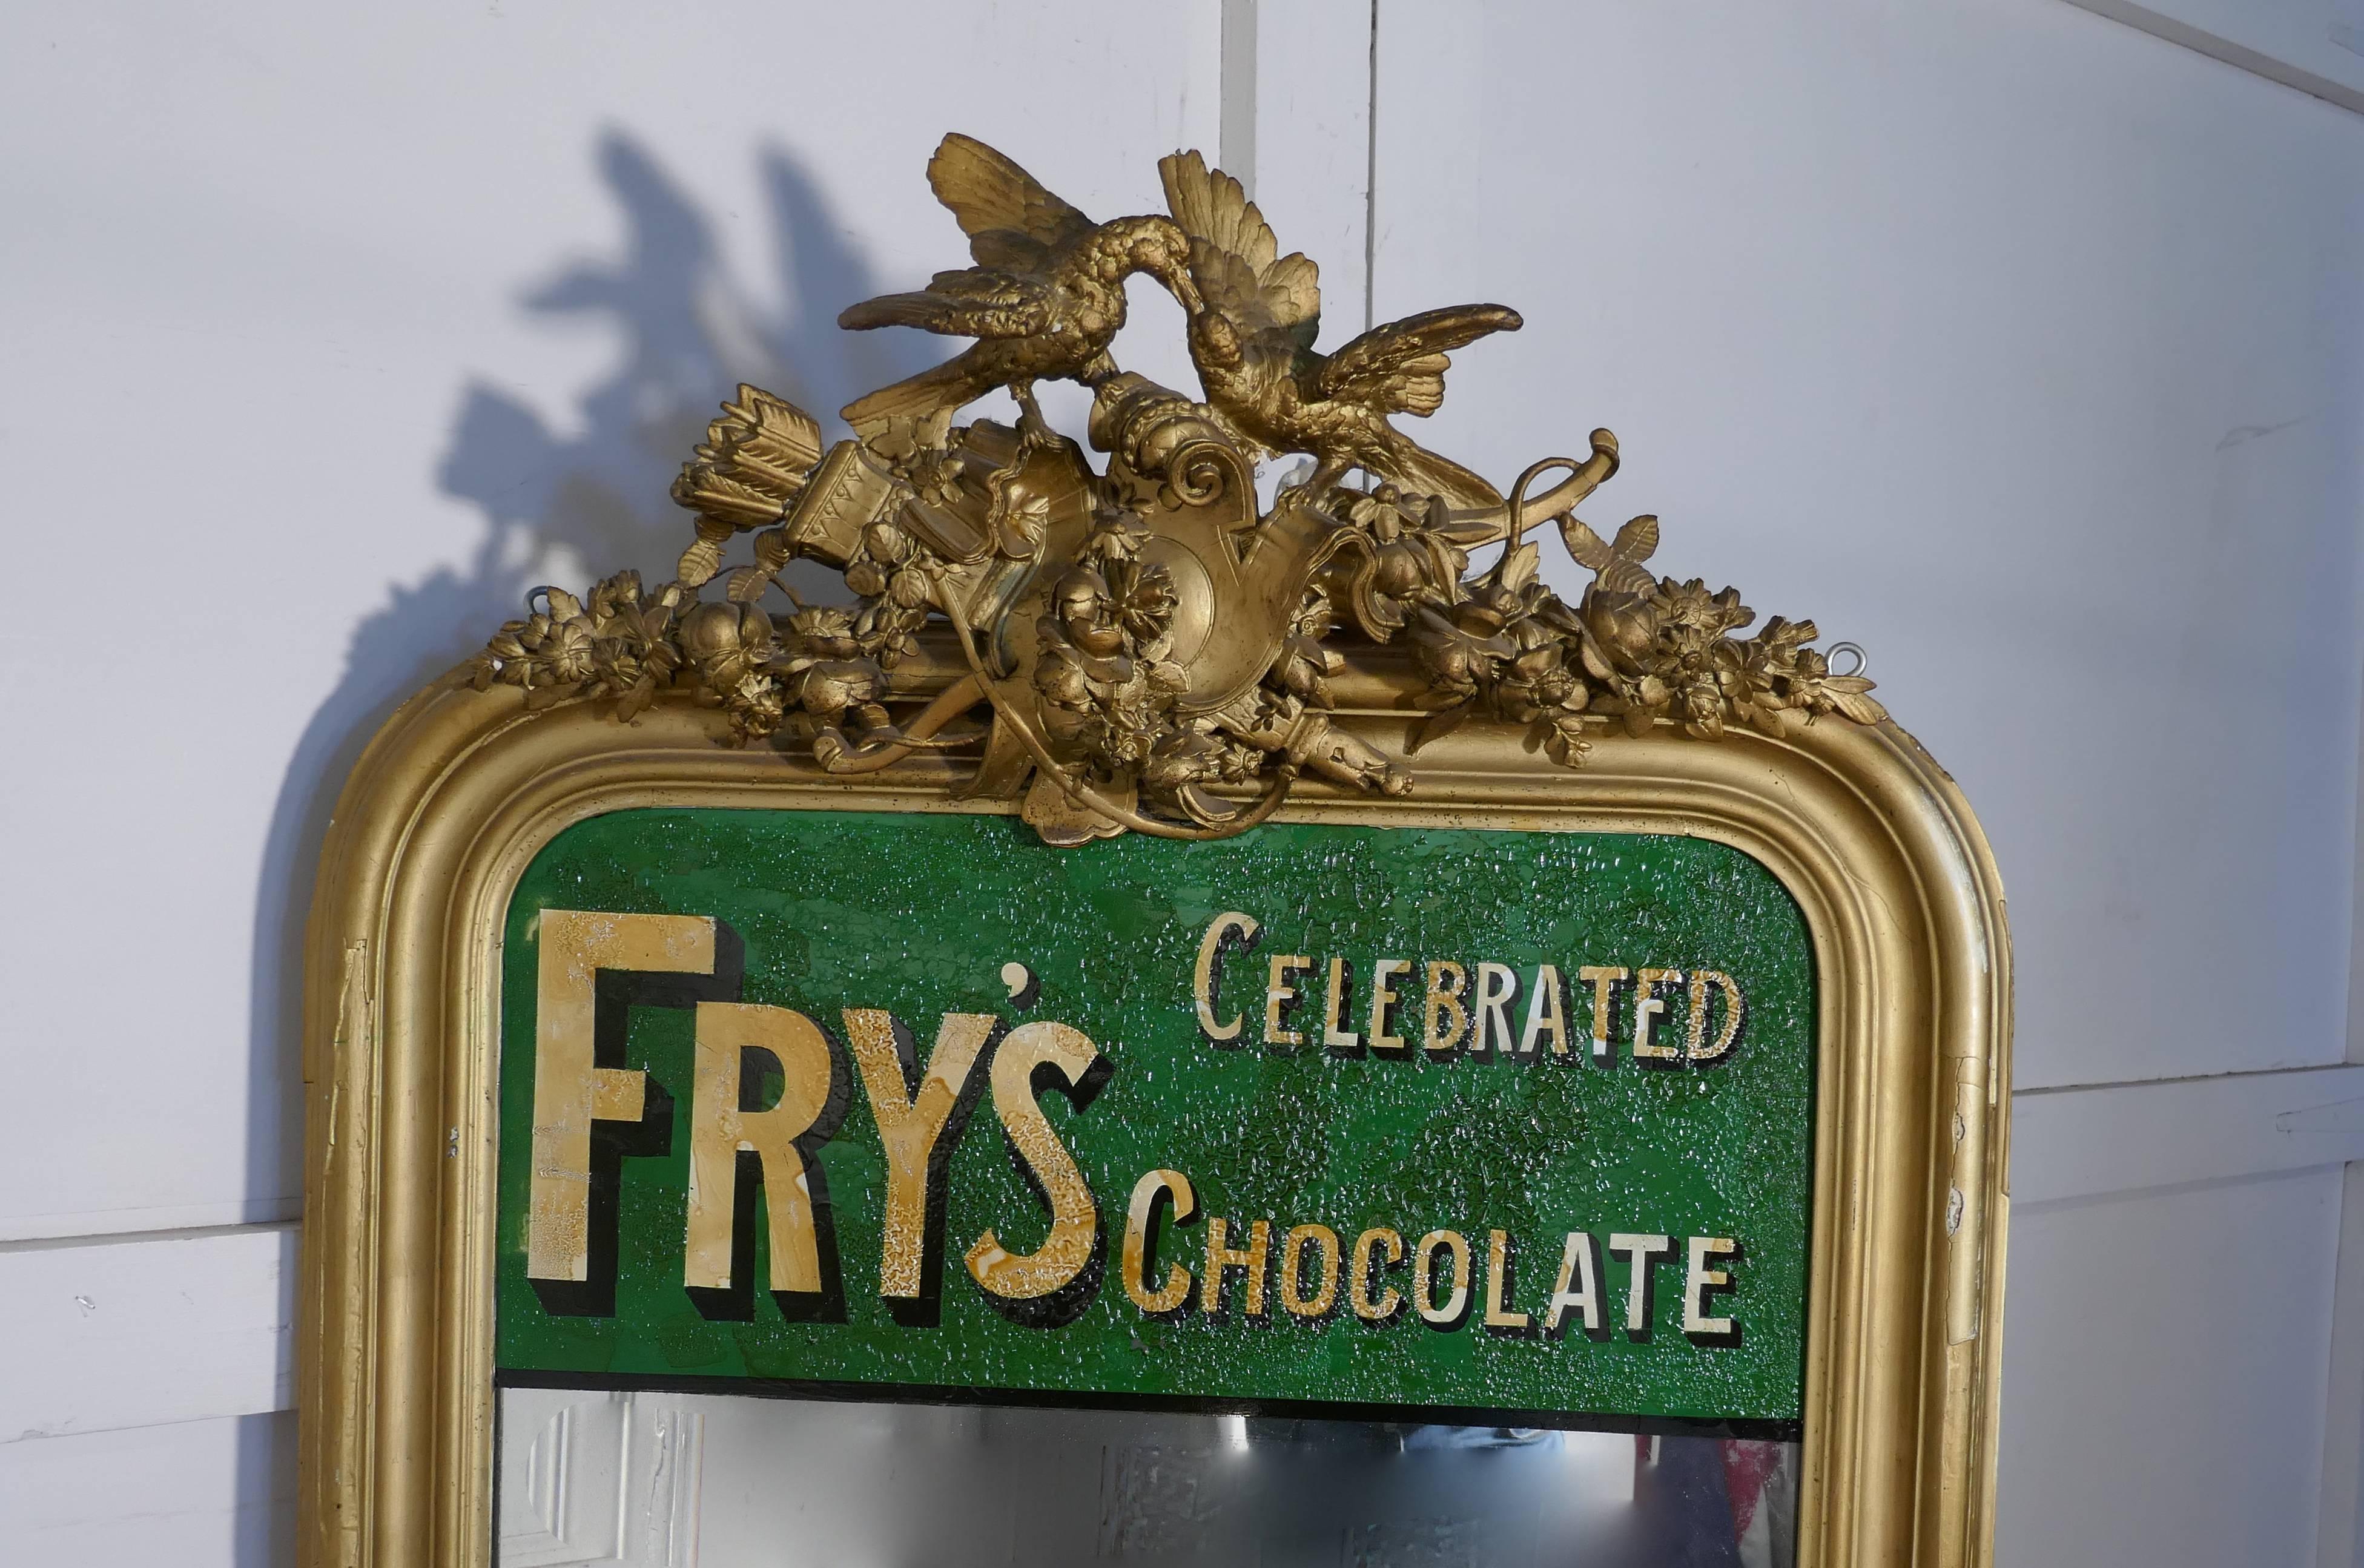 Industrial Large Victorian Advertising Mirror, Fry’s Chocolate Overmantel